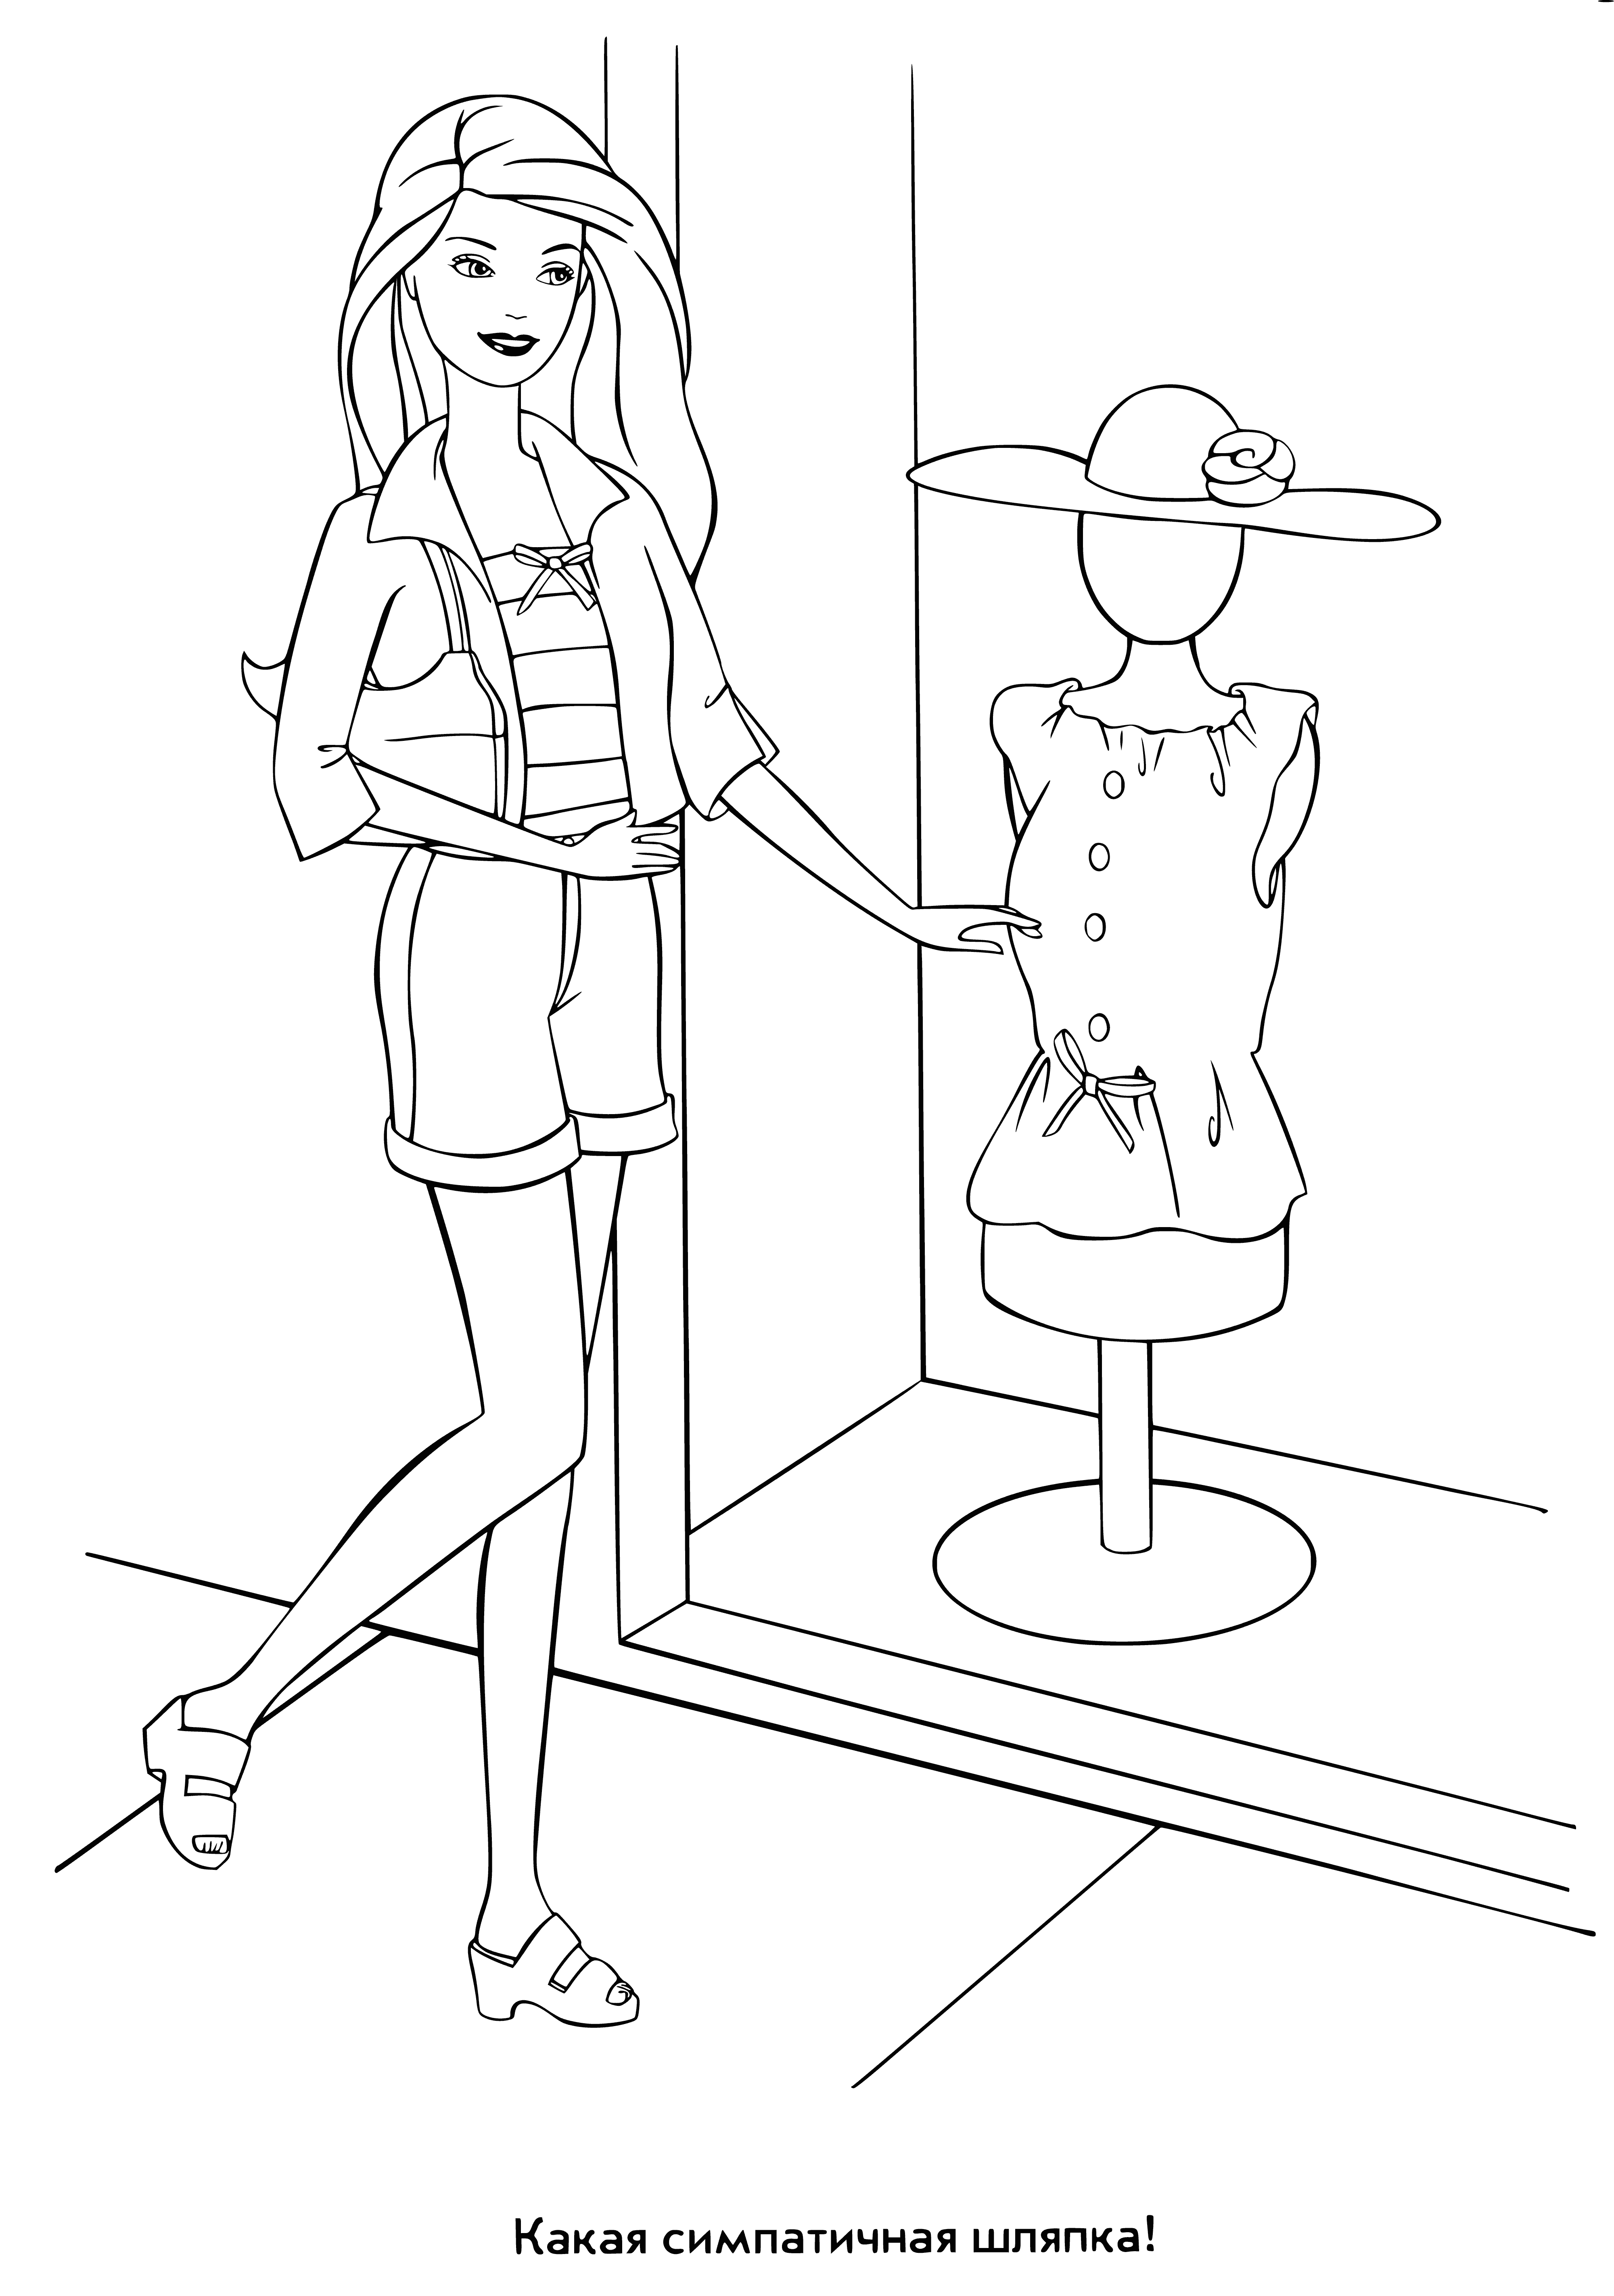 coloring page: Girl with blonde hair & blue eyes holds a pink & purple hat, wearing a pink shirt & purple skirt, admiring self in the mirror.